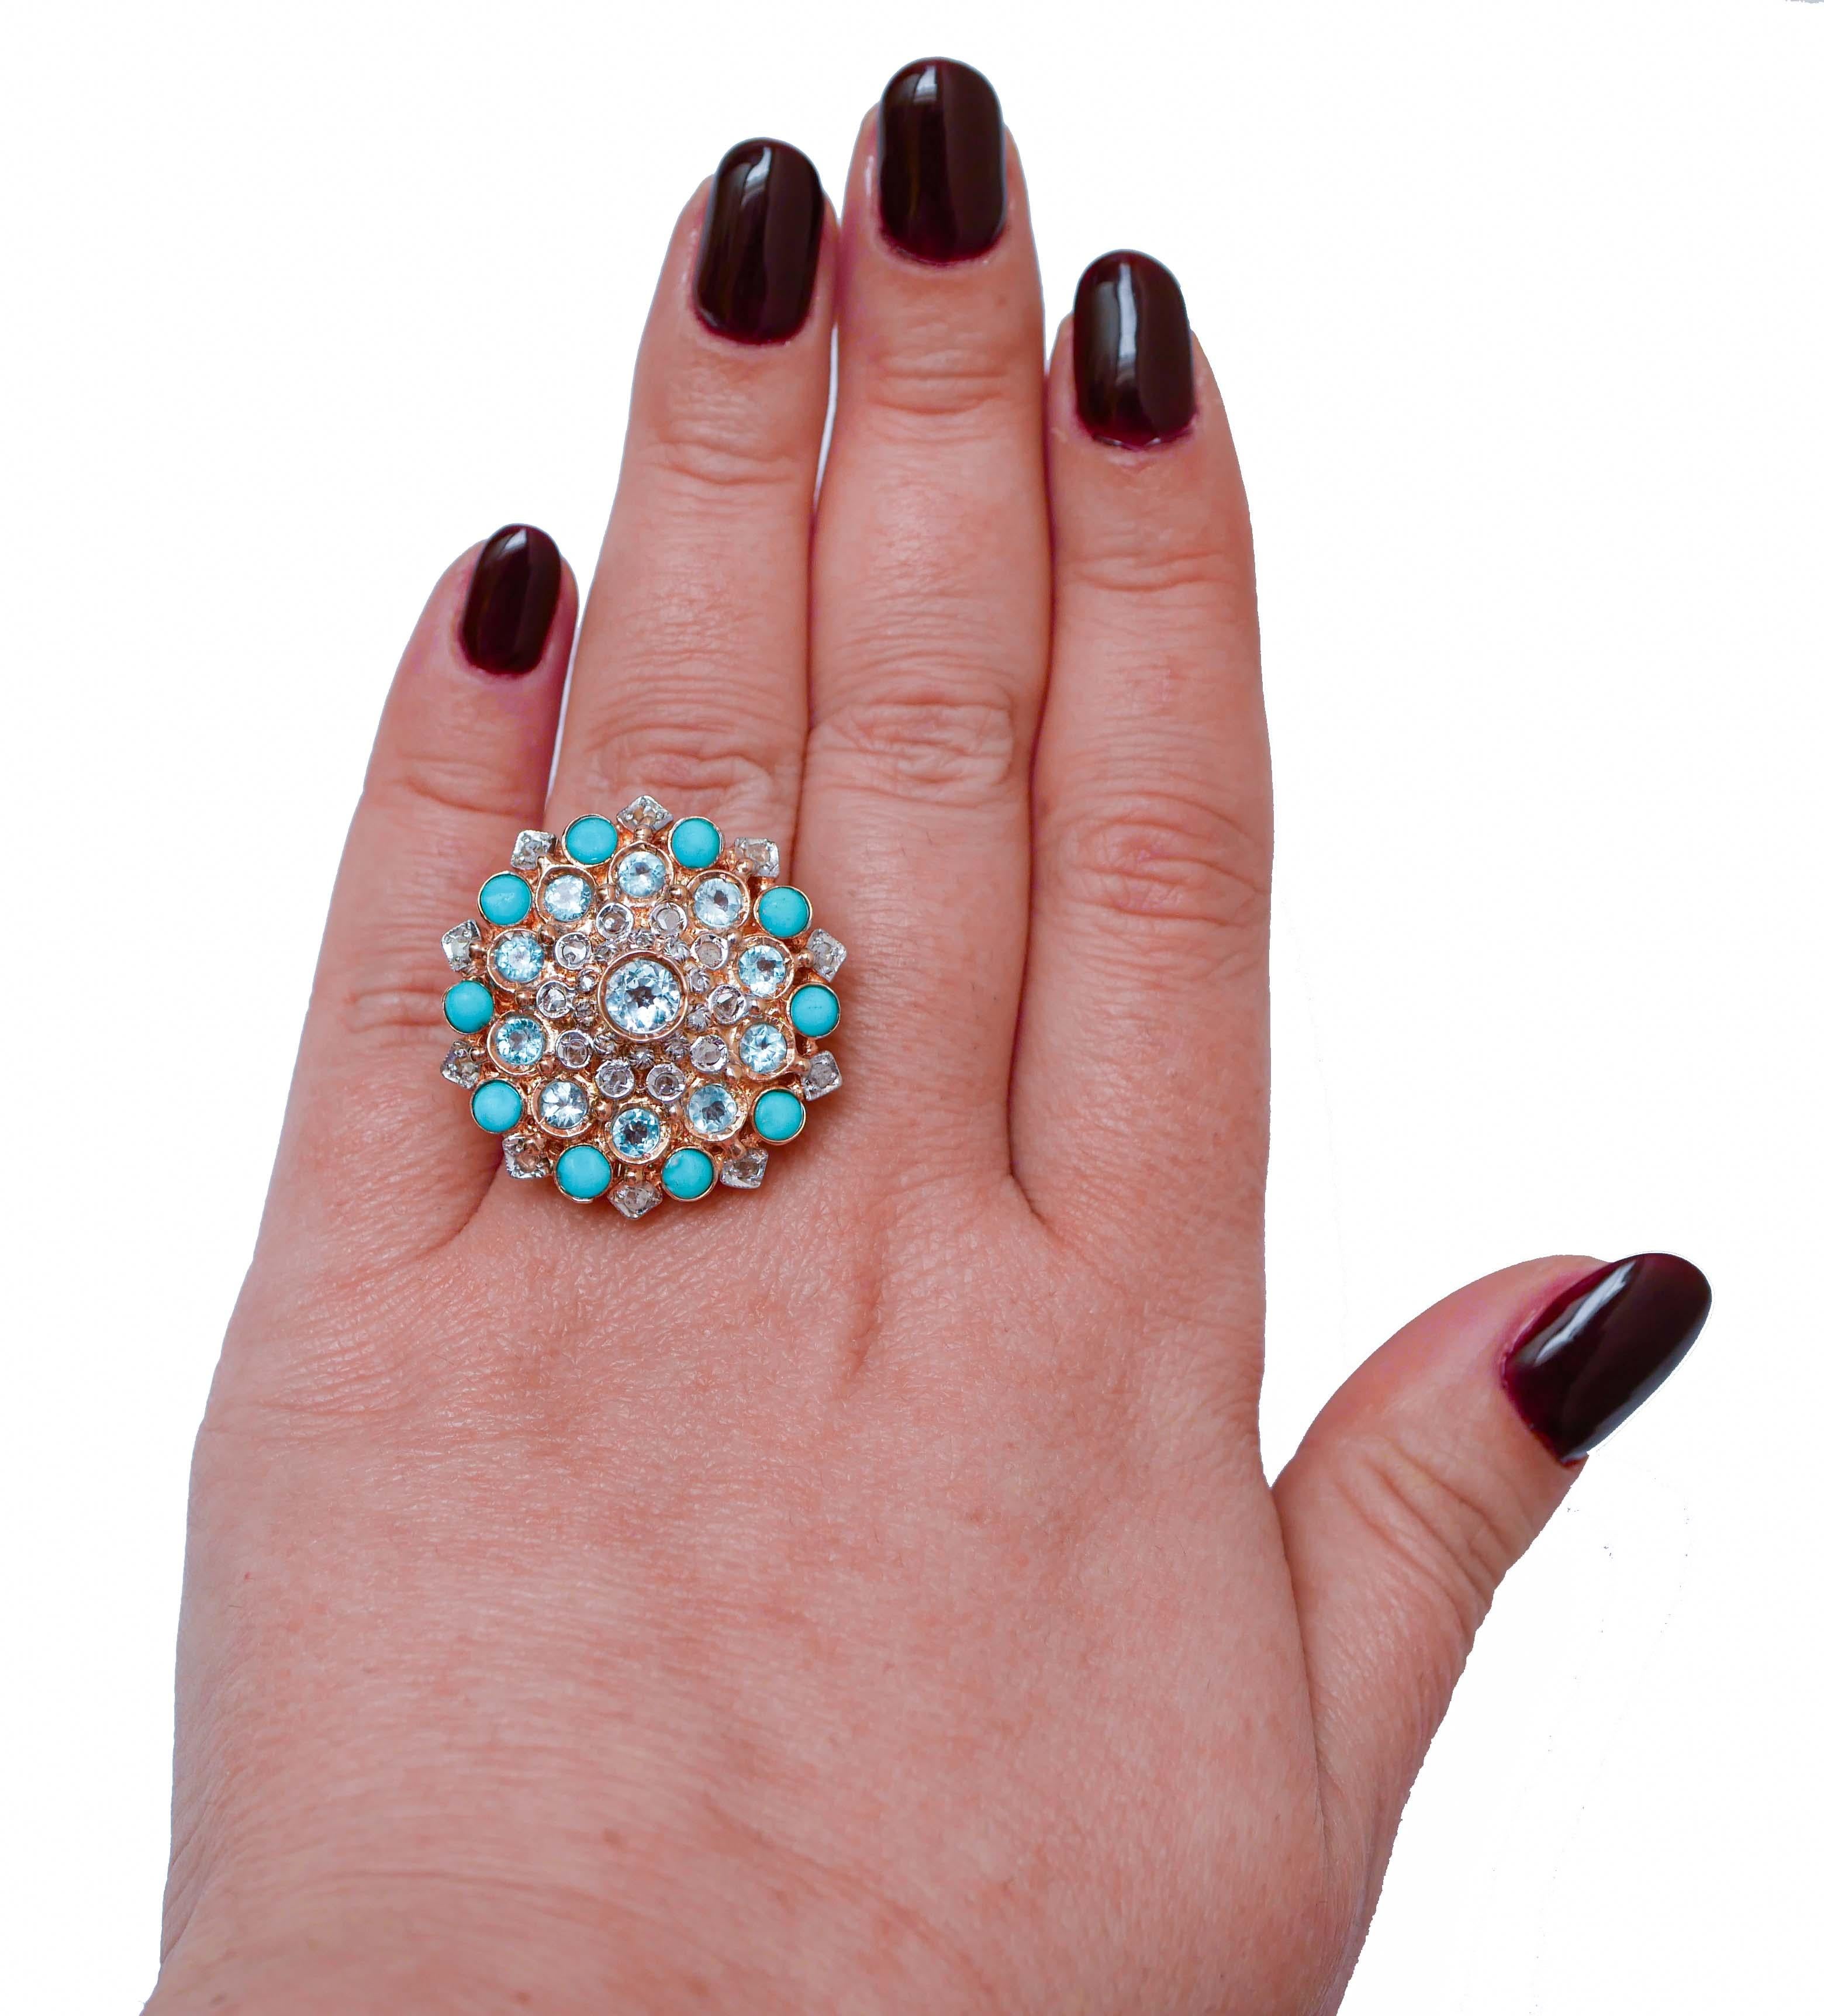 Mixed Cut Turquoise, Aquamarine Colour Topazs, Diamonds, Rose Gold and Silver Ring. For Sale